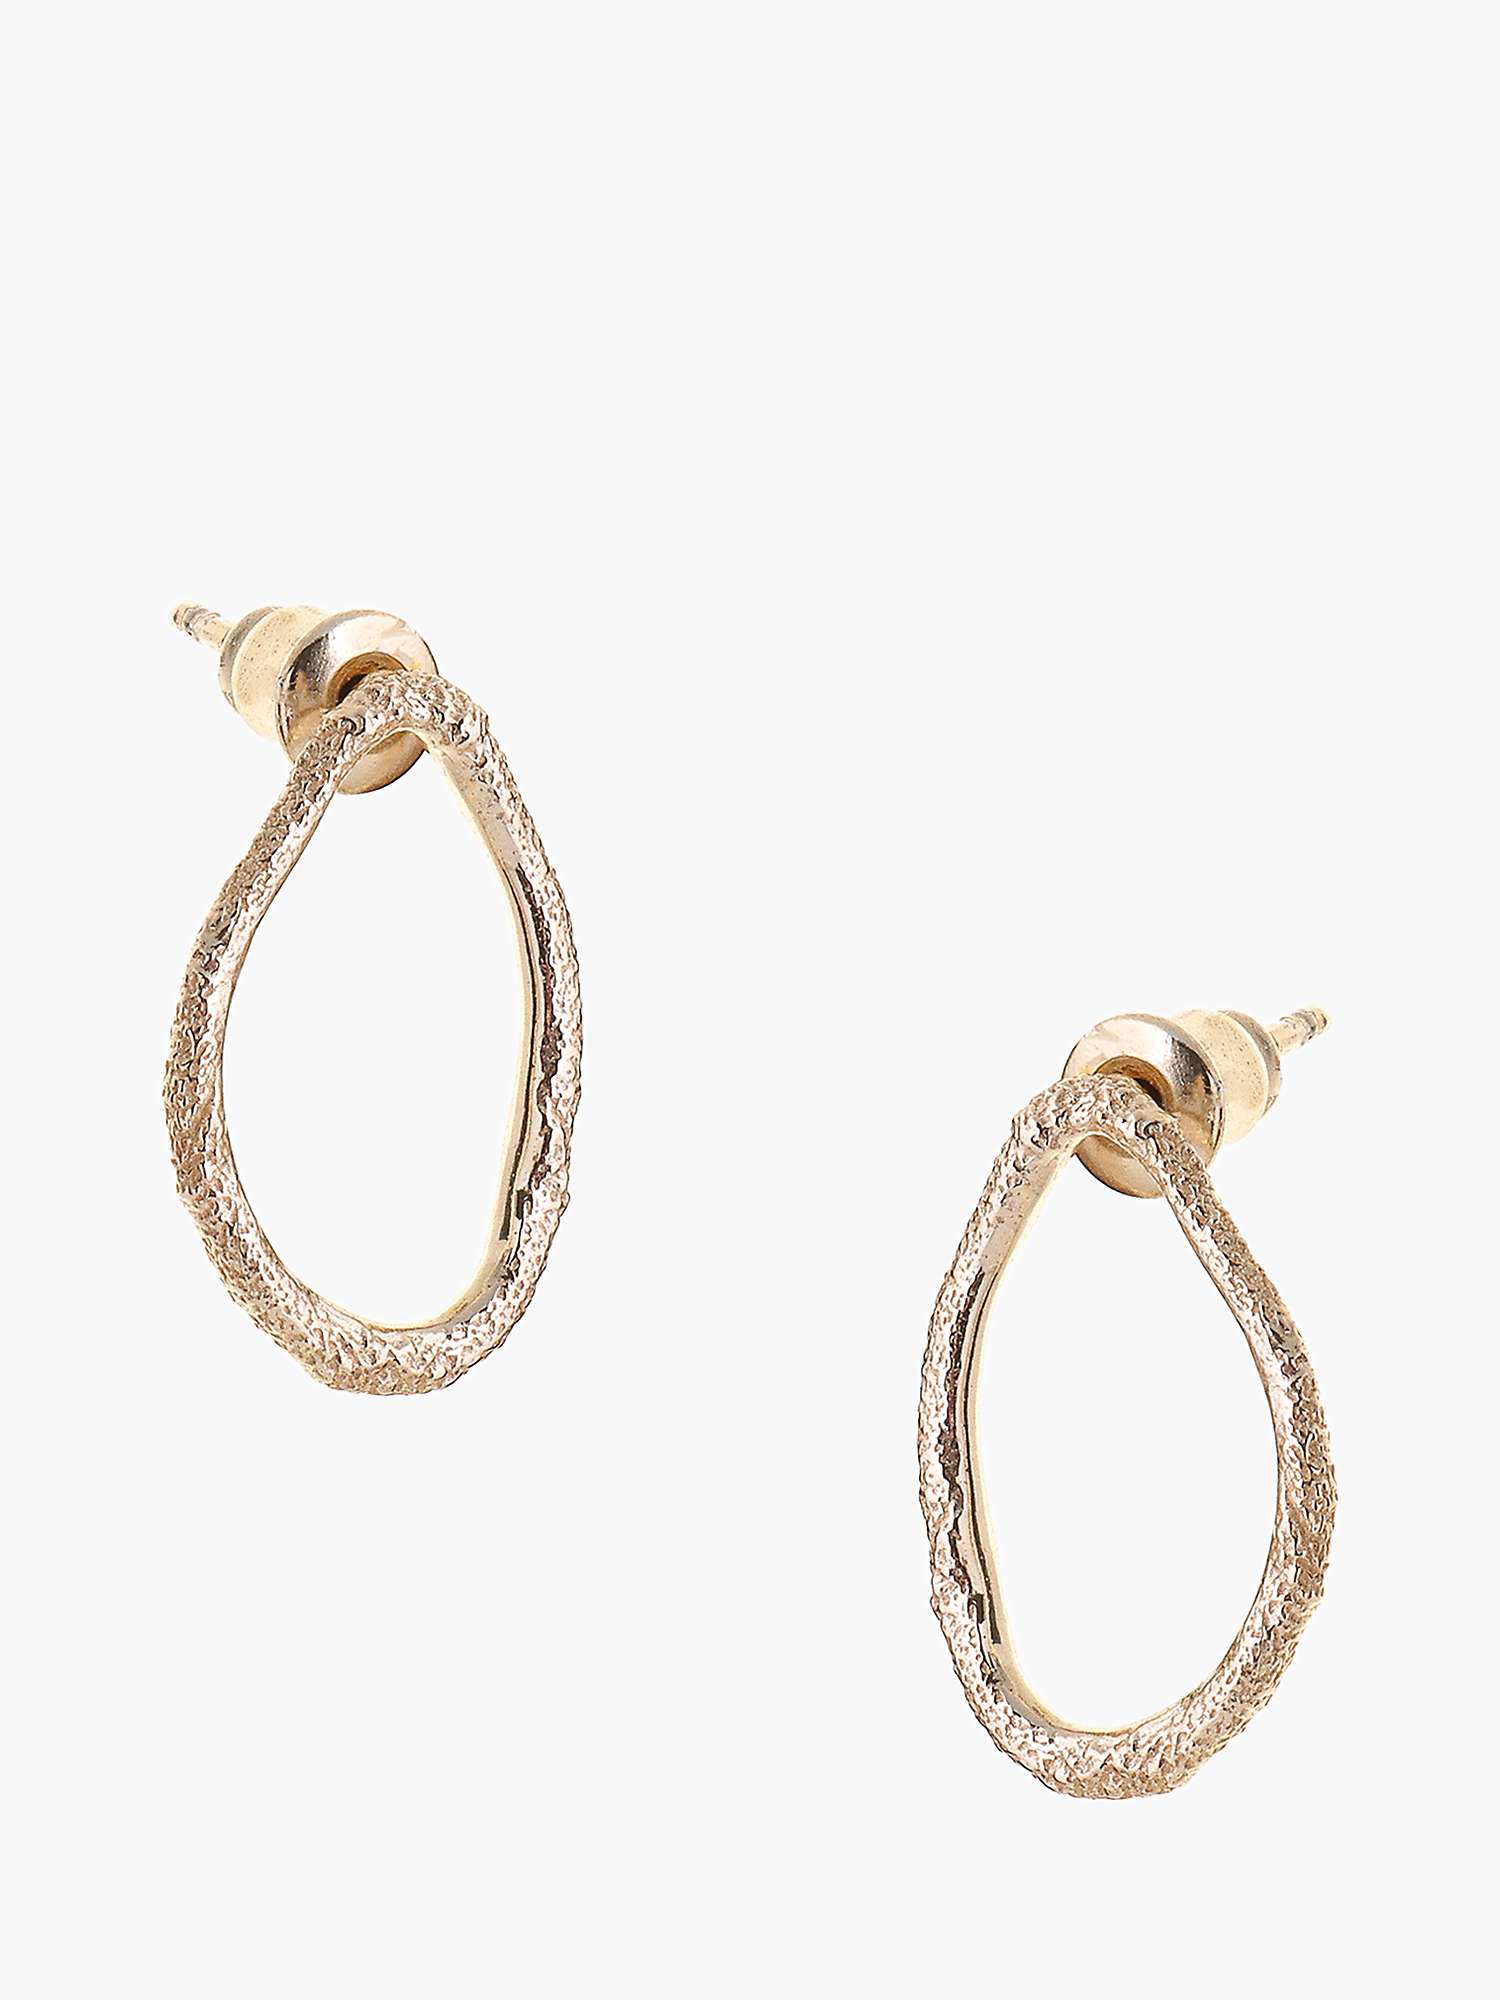 Buy Tutti & Co Seize Textured Drop Earrings Online at johnlewis.com